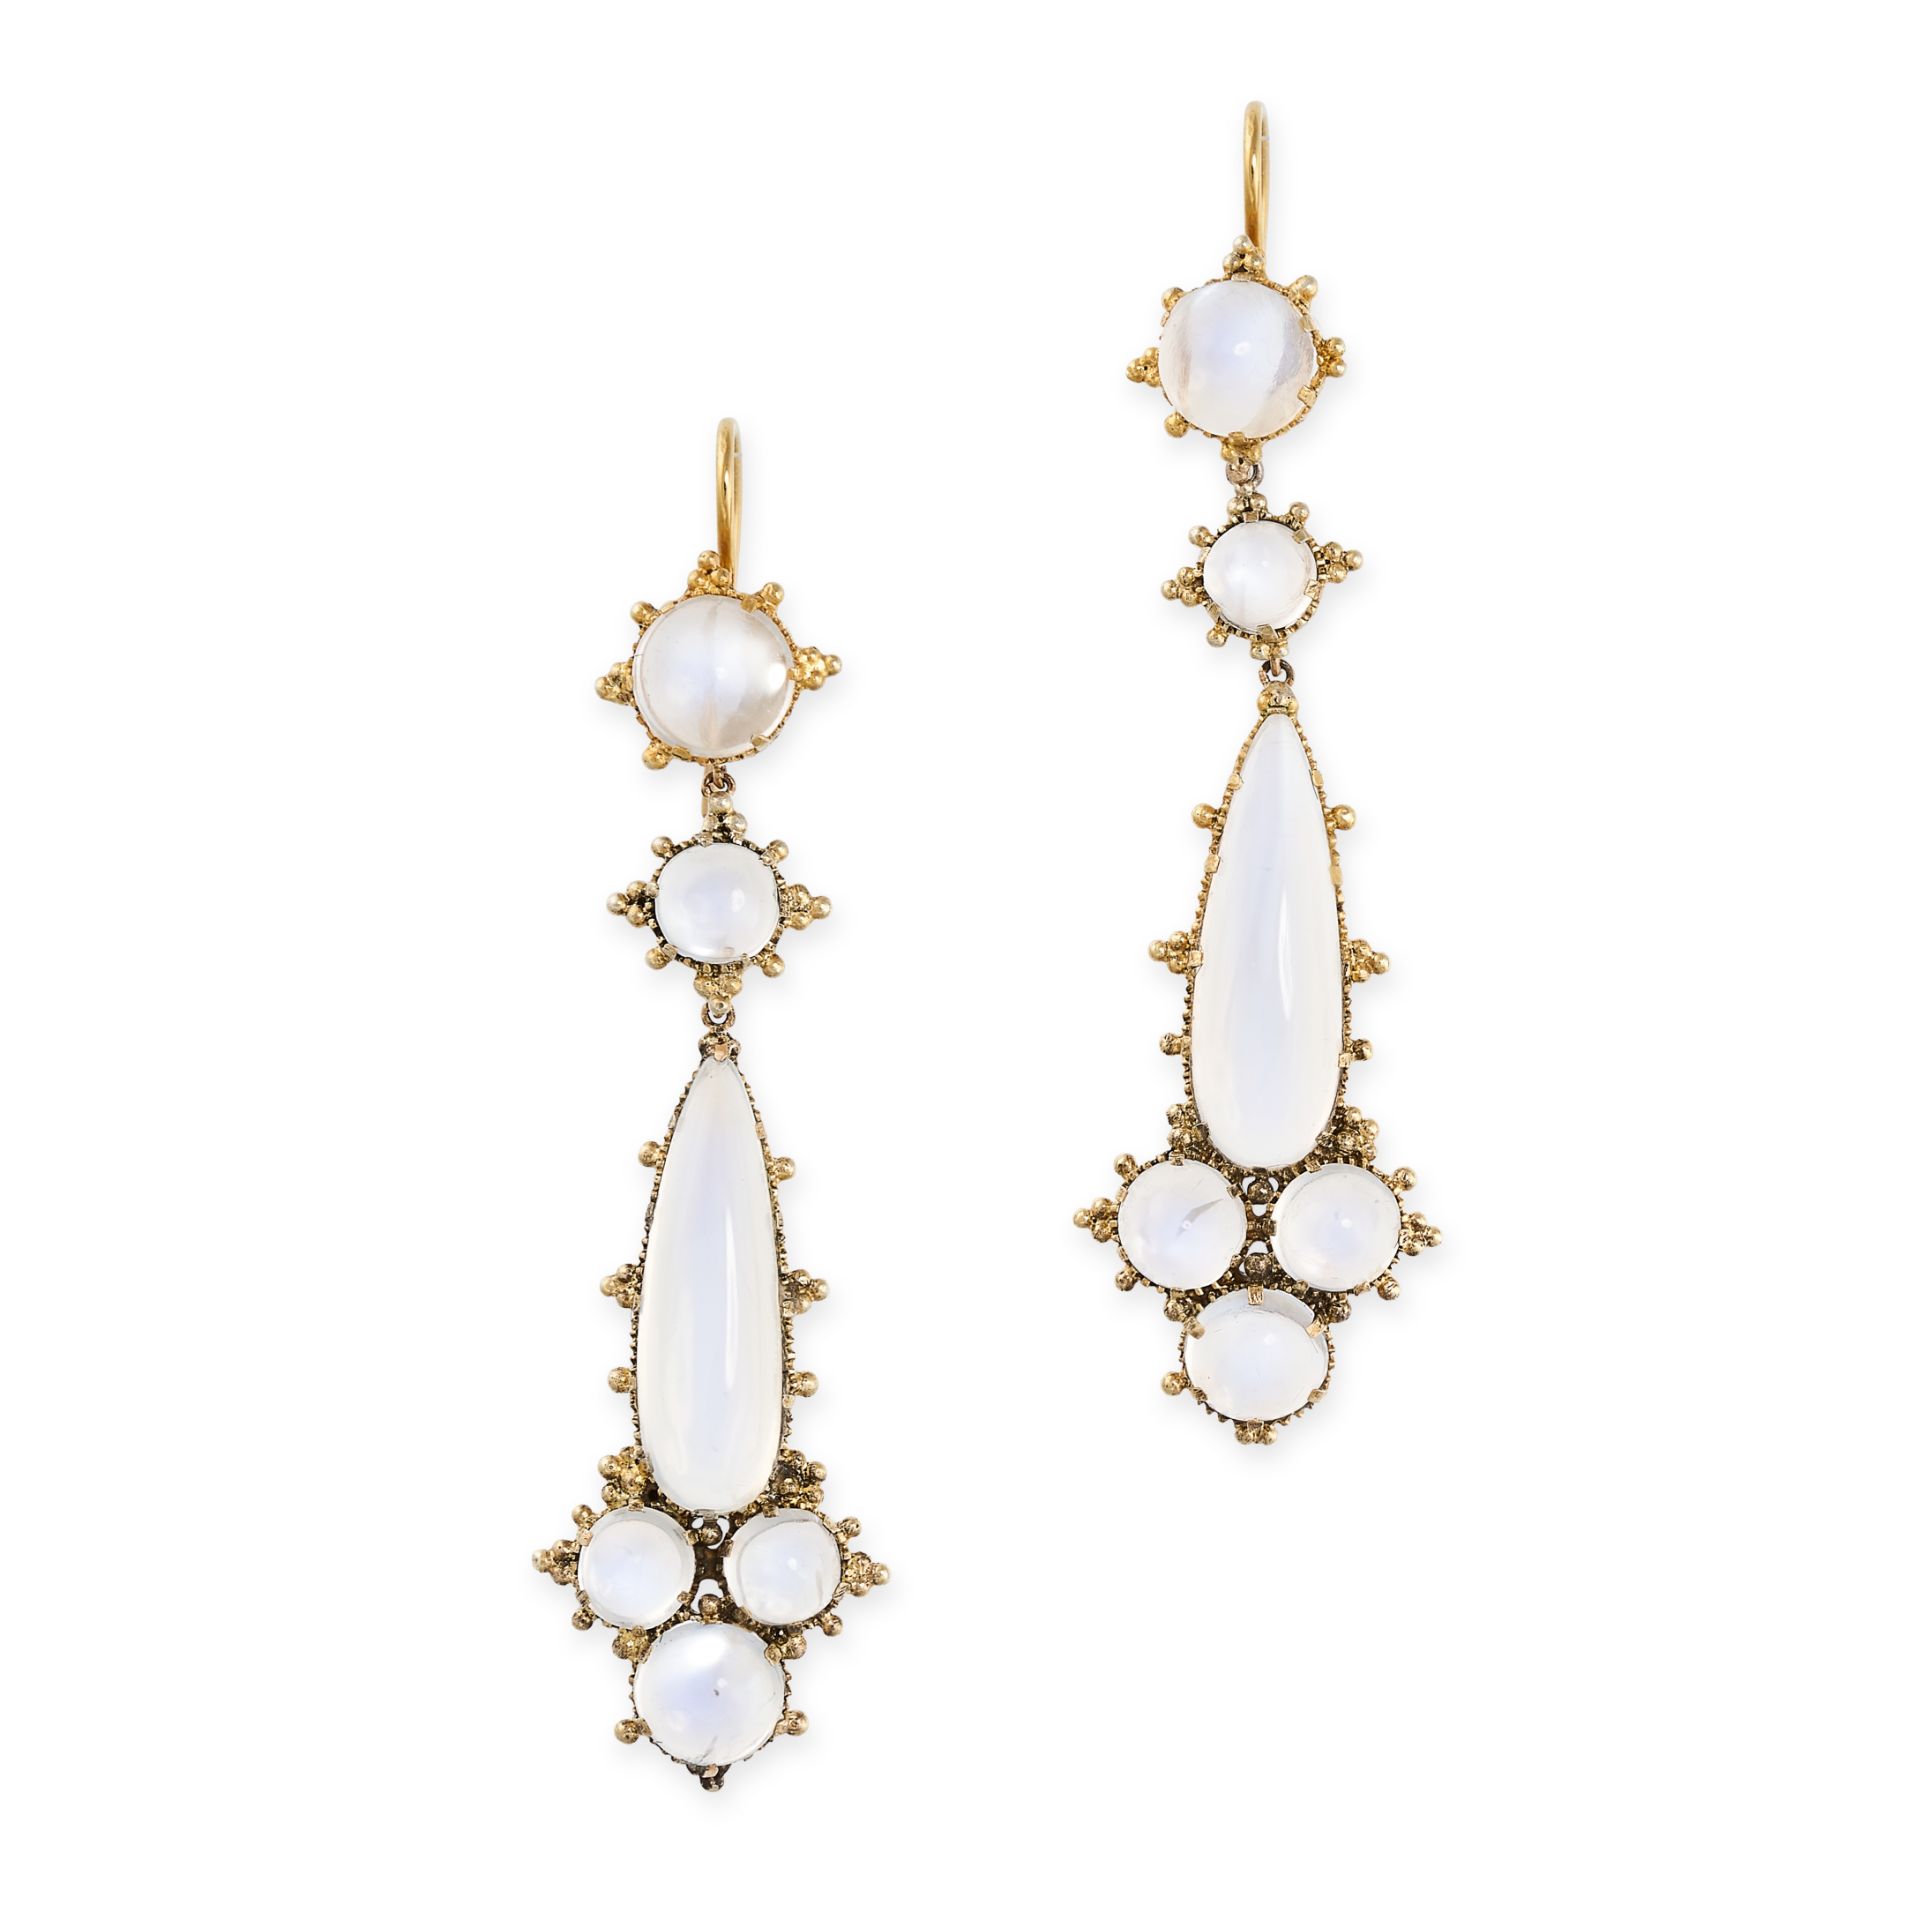 A PAIR OF ANTIQUE MOONSTONE EARRINGS in yellow gold, each of articulated design, set with round